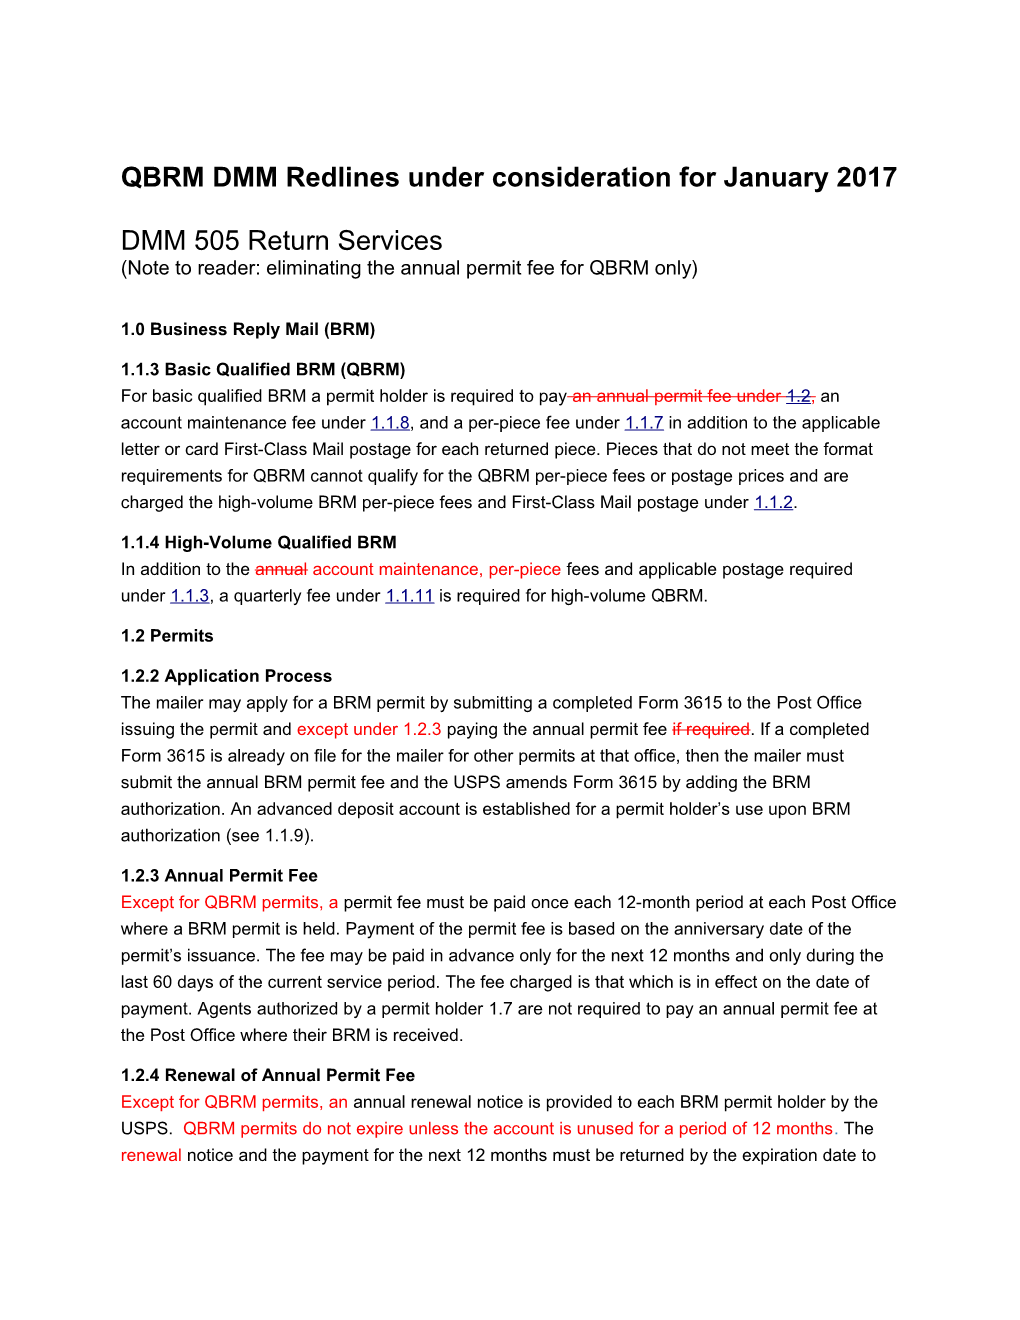 QBRM DMM Redlines Under Consideration for January 2017